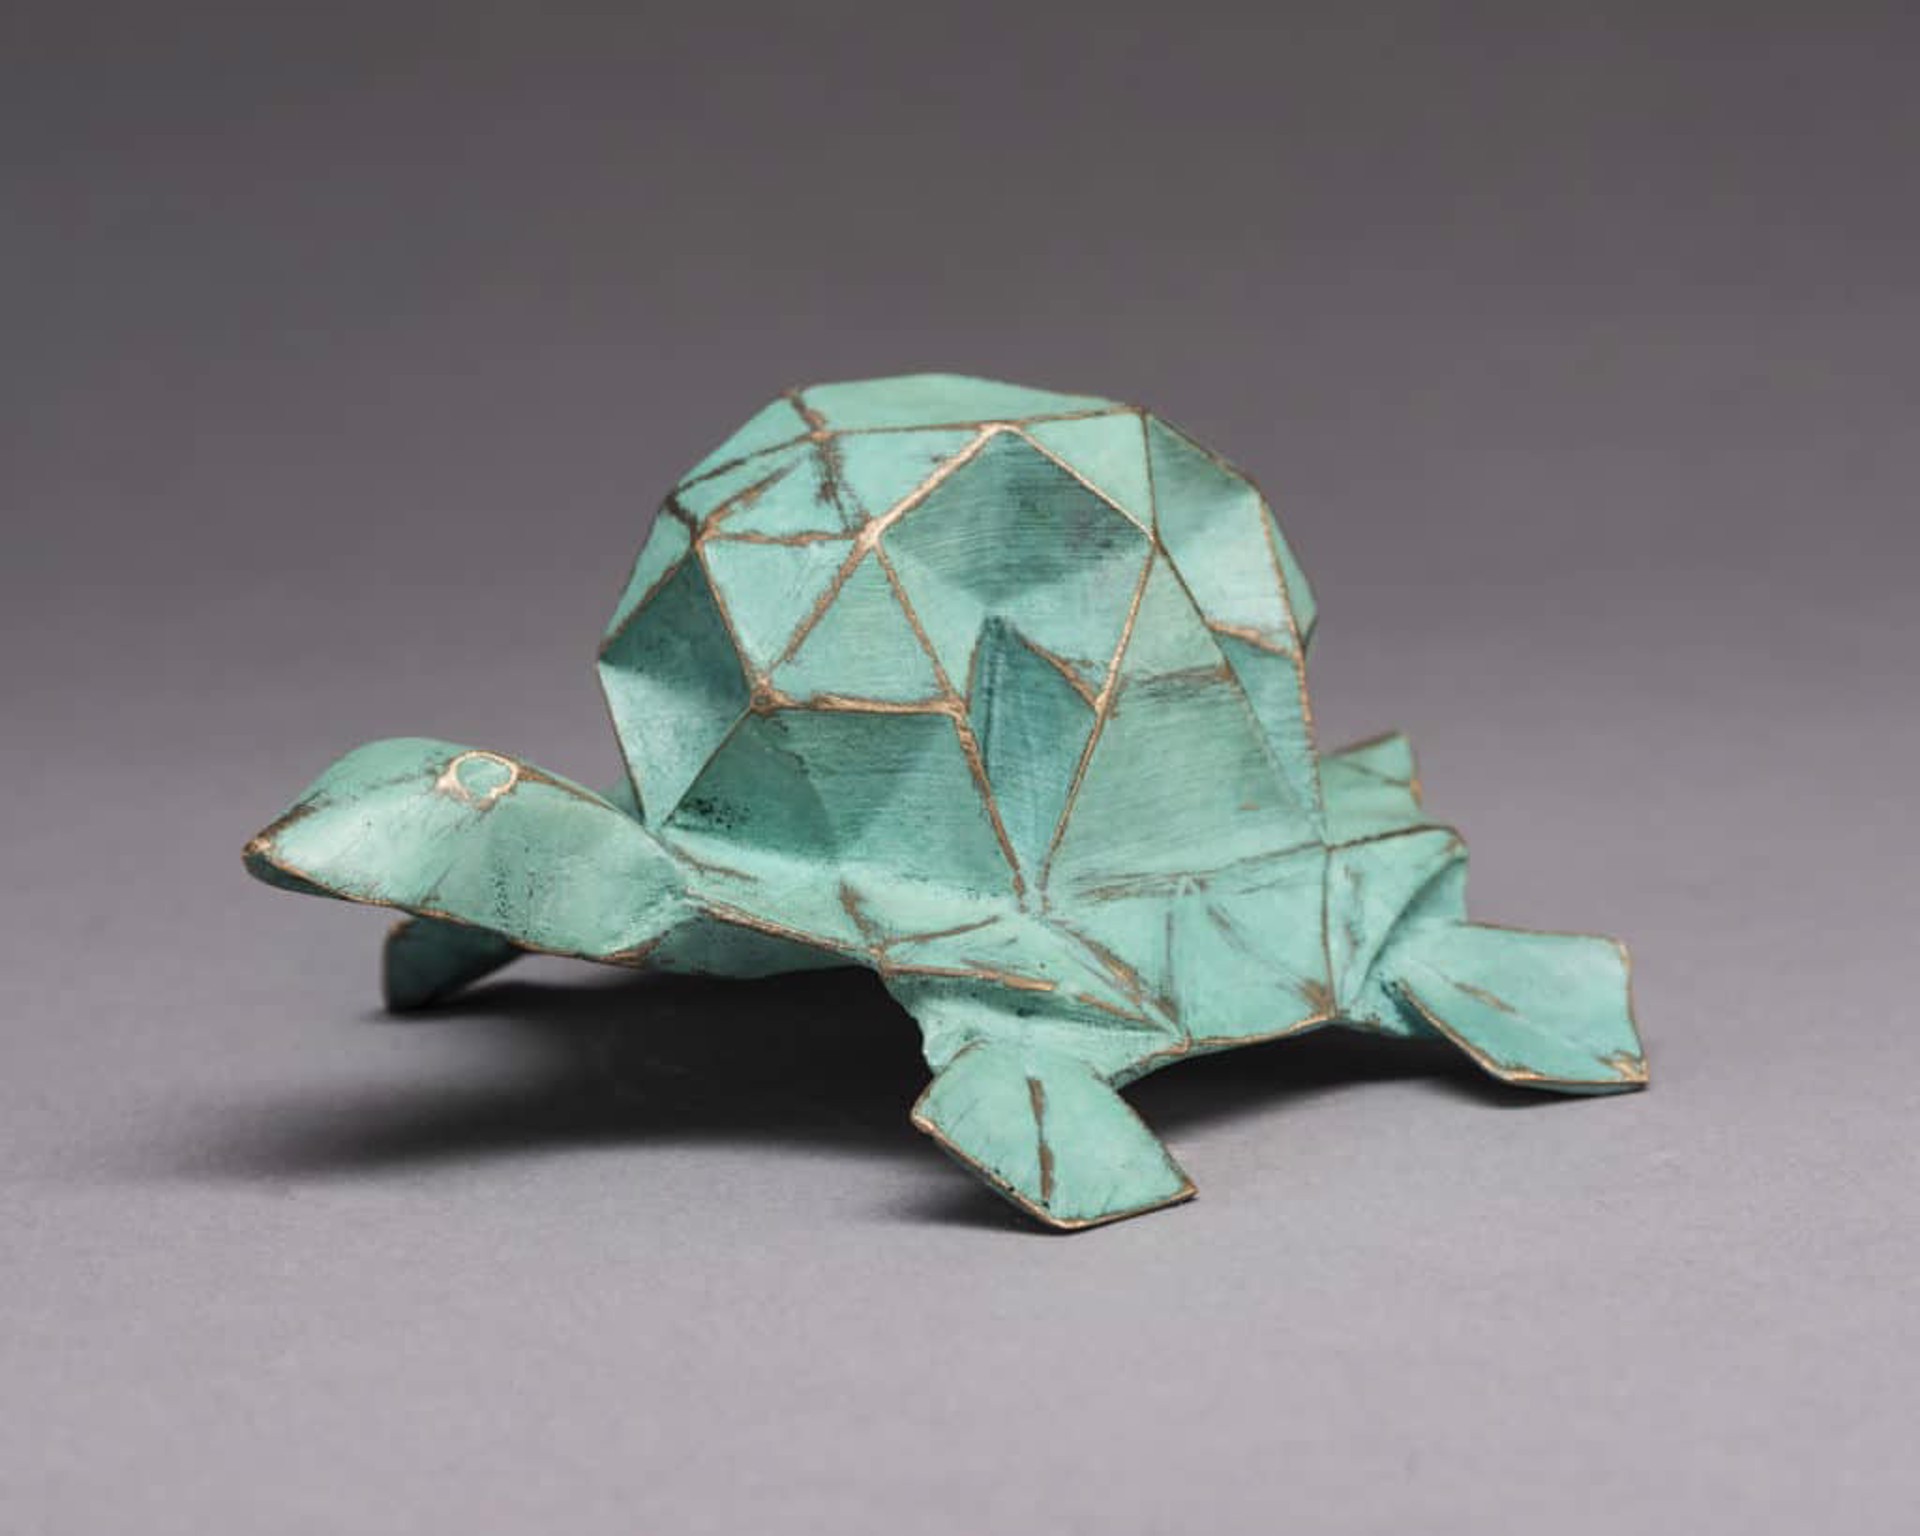 Star Tortoise  in collaboration with Beth Johnson by Kevin Box Studio